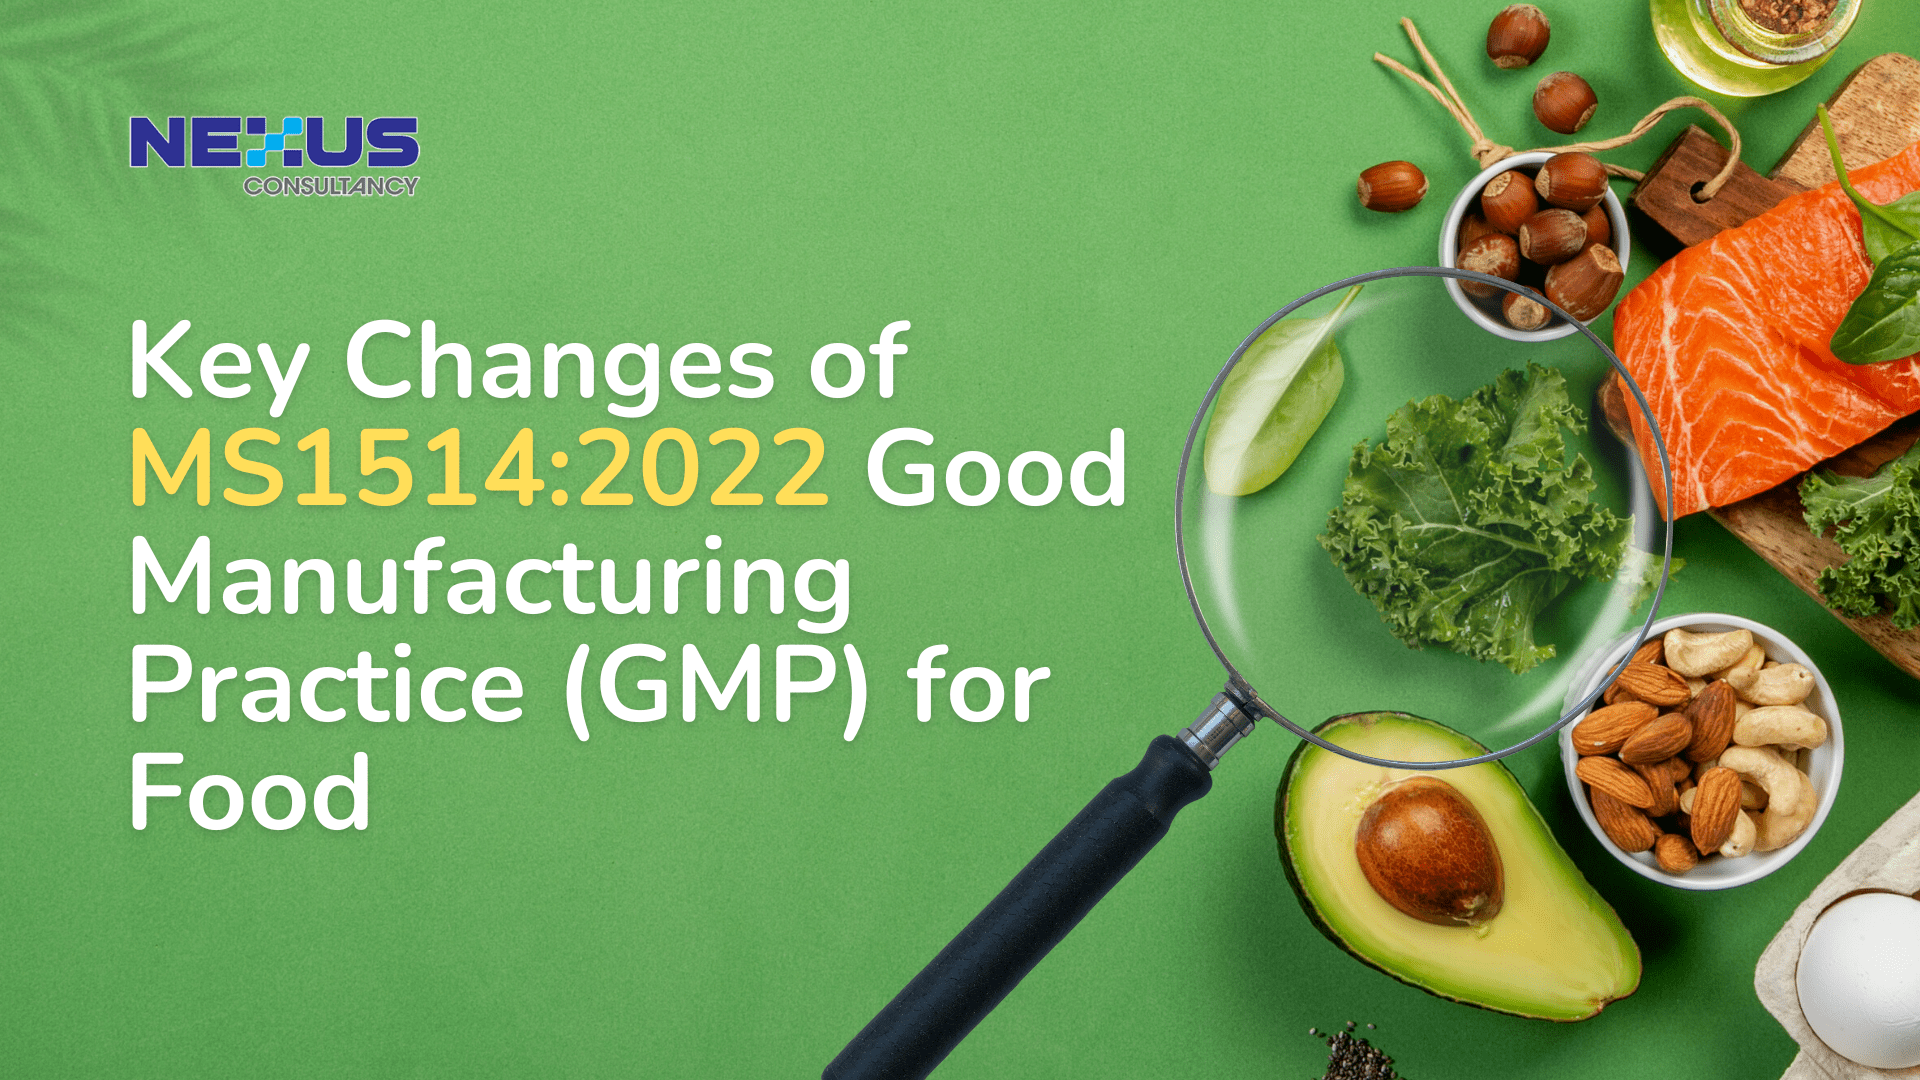 Key Changes of MS1514:2022 Good Manufacturing Practice (GMP) for Food